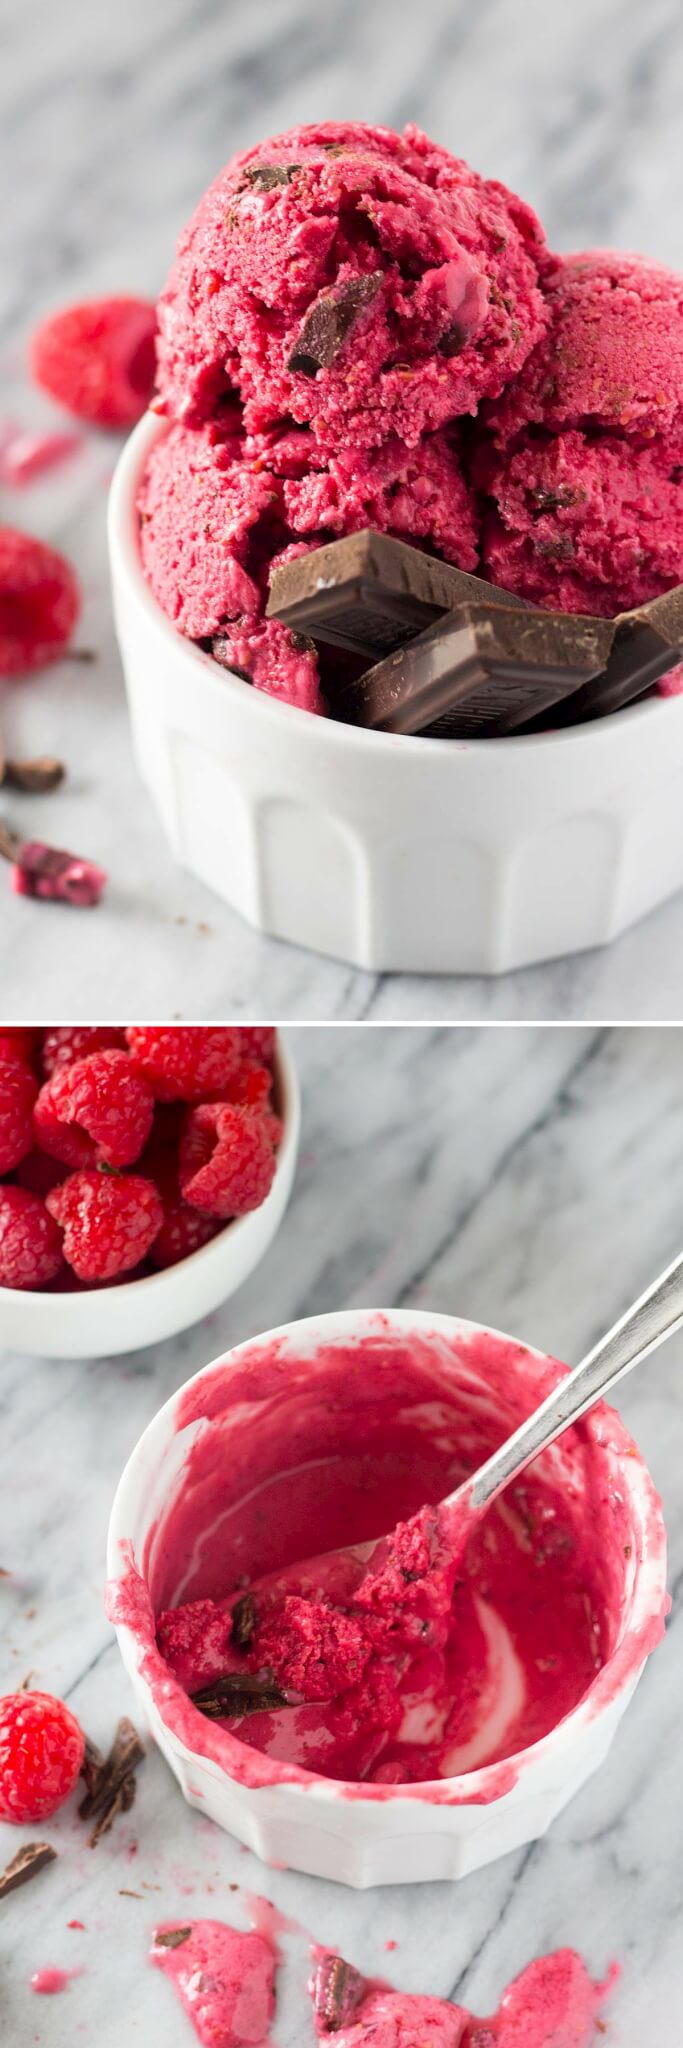 Cold, creamy Dark Chocolate Raspberry Frozen Yogurt. Only 5 minutes, 4 ingredients, with no refined sugars & made without an ice cream maker - it's so easy and so delicious!